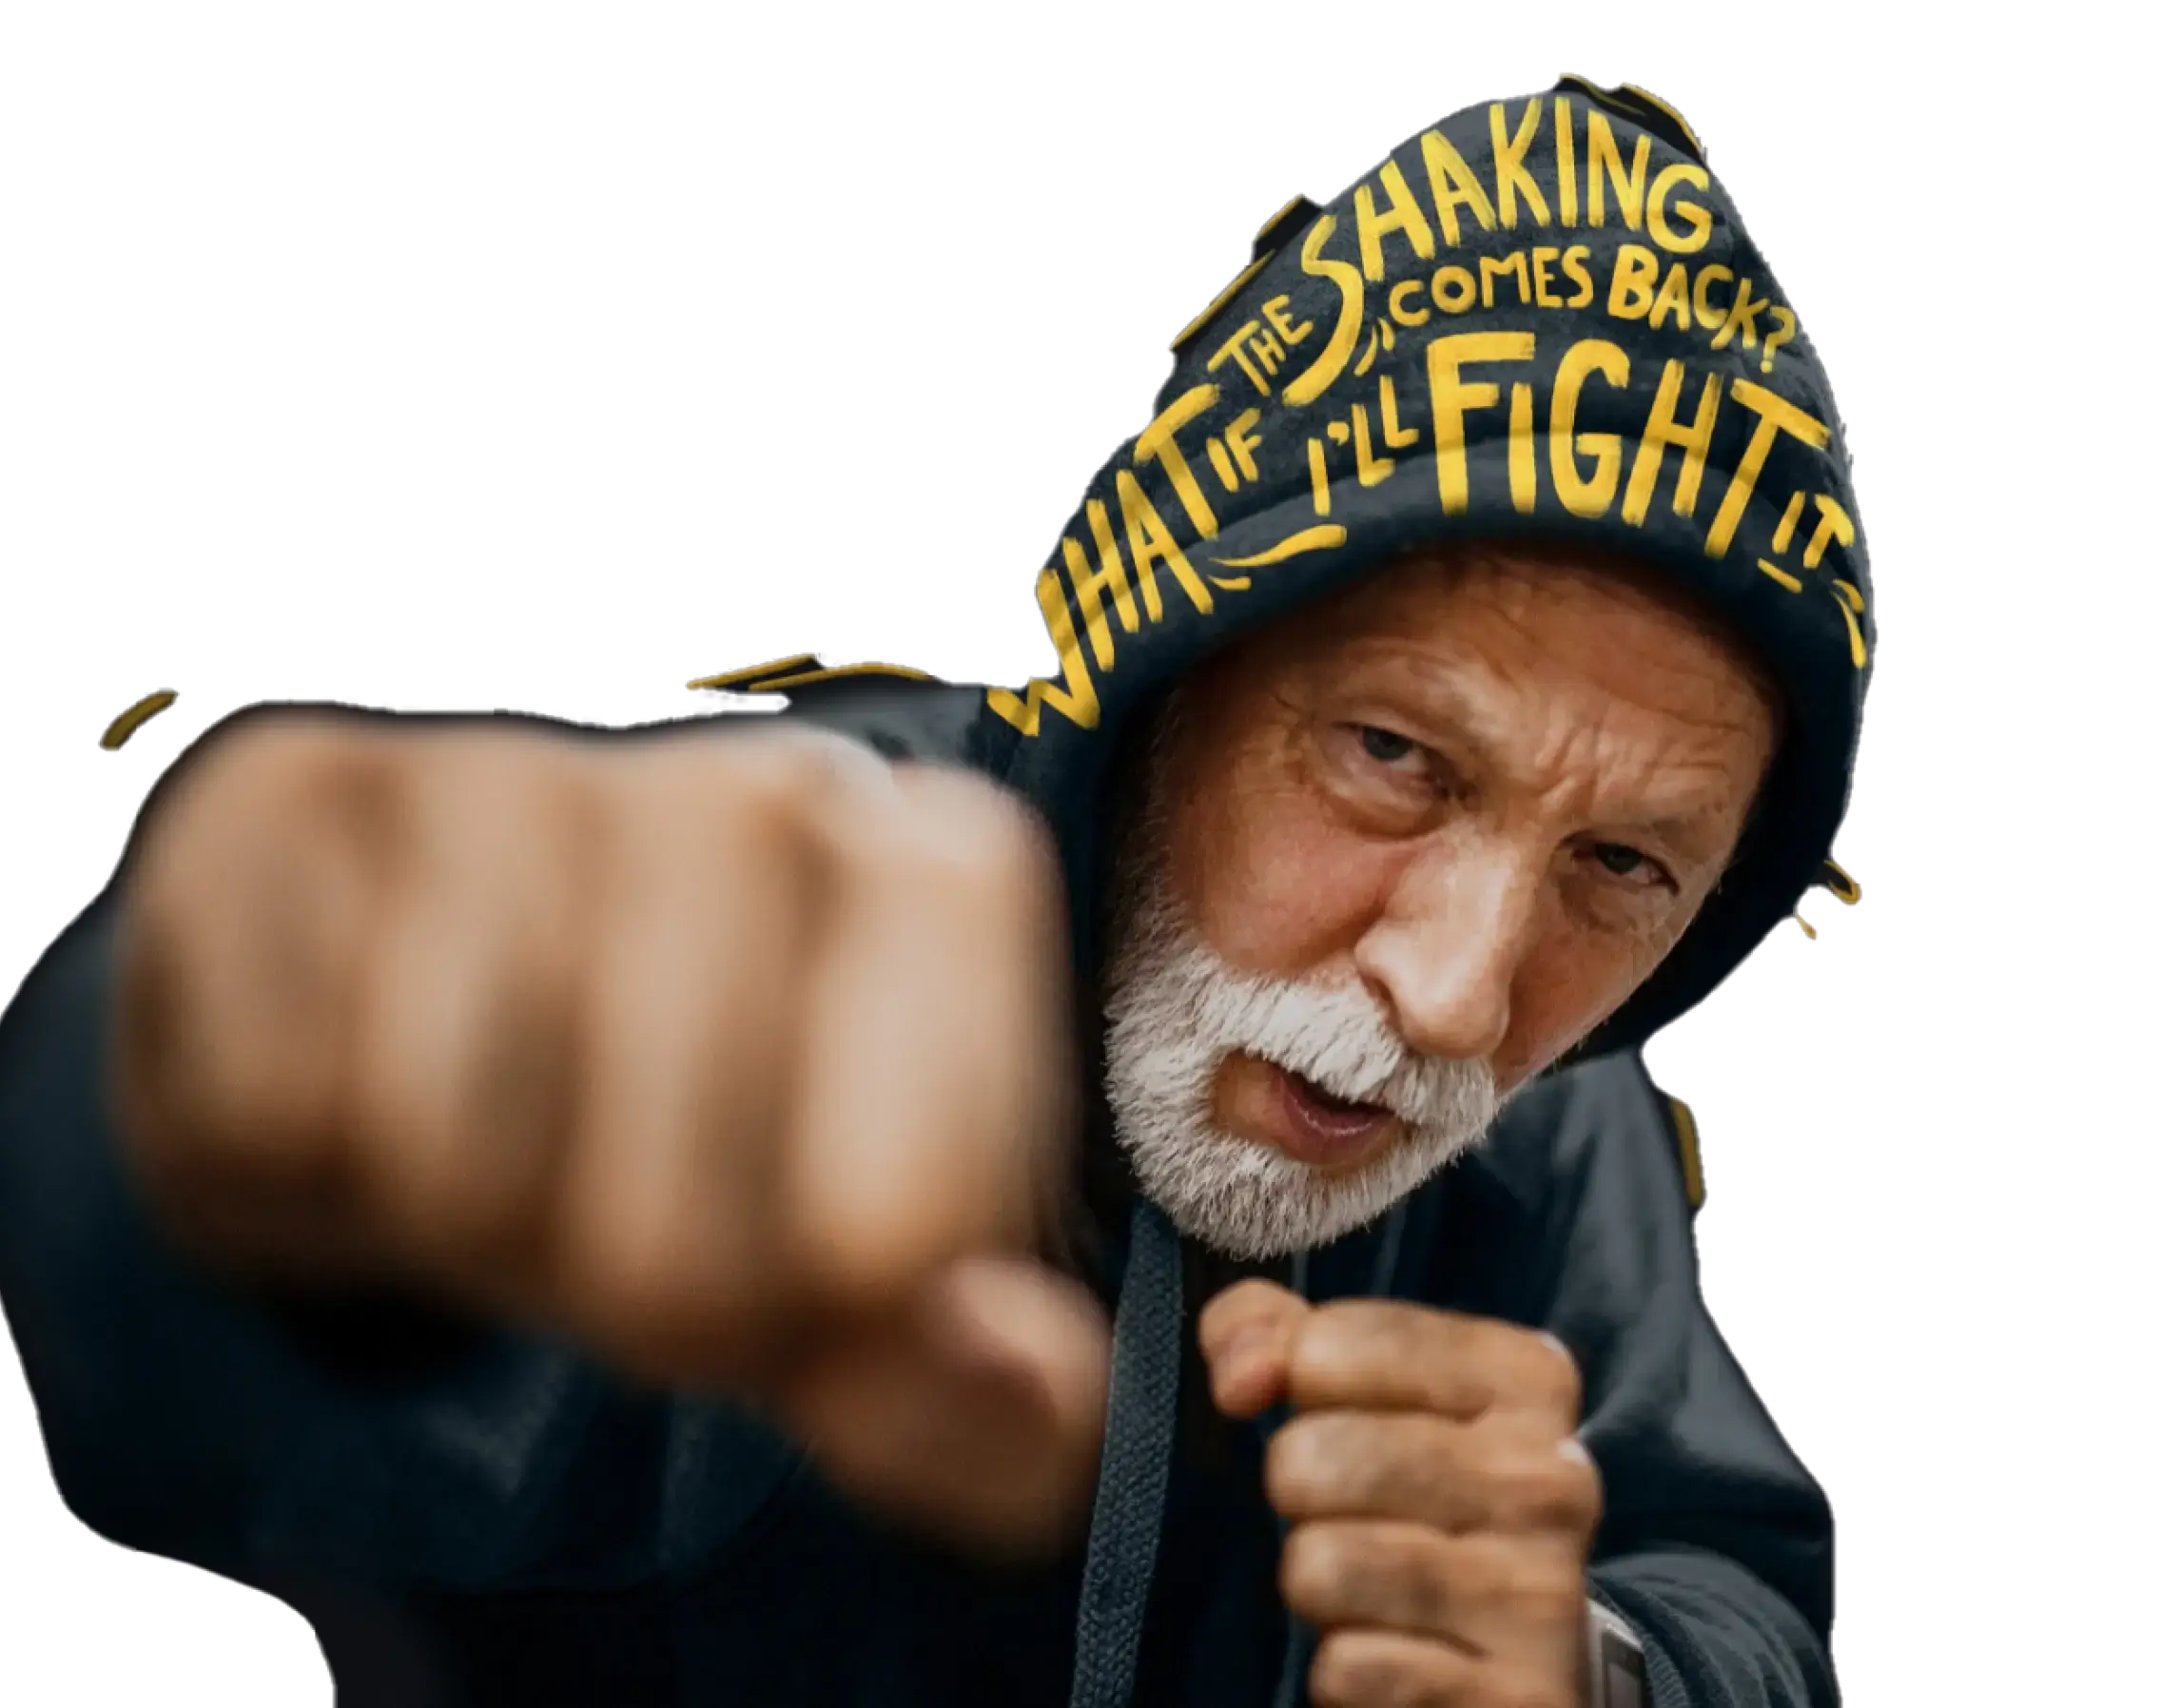 A man dressed in a hoodie punches towards the camera. The text on his hood reads "What if the shaking comes back? I'll fight it."